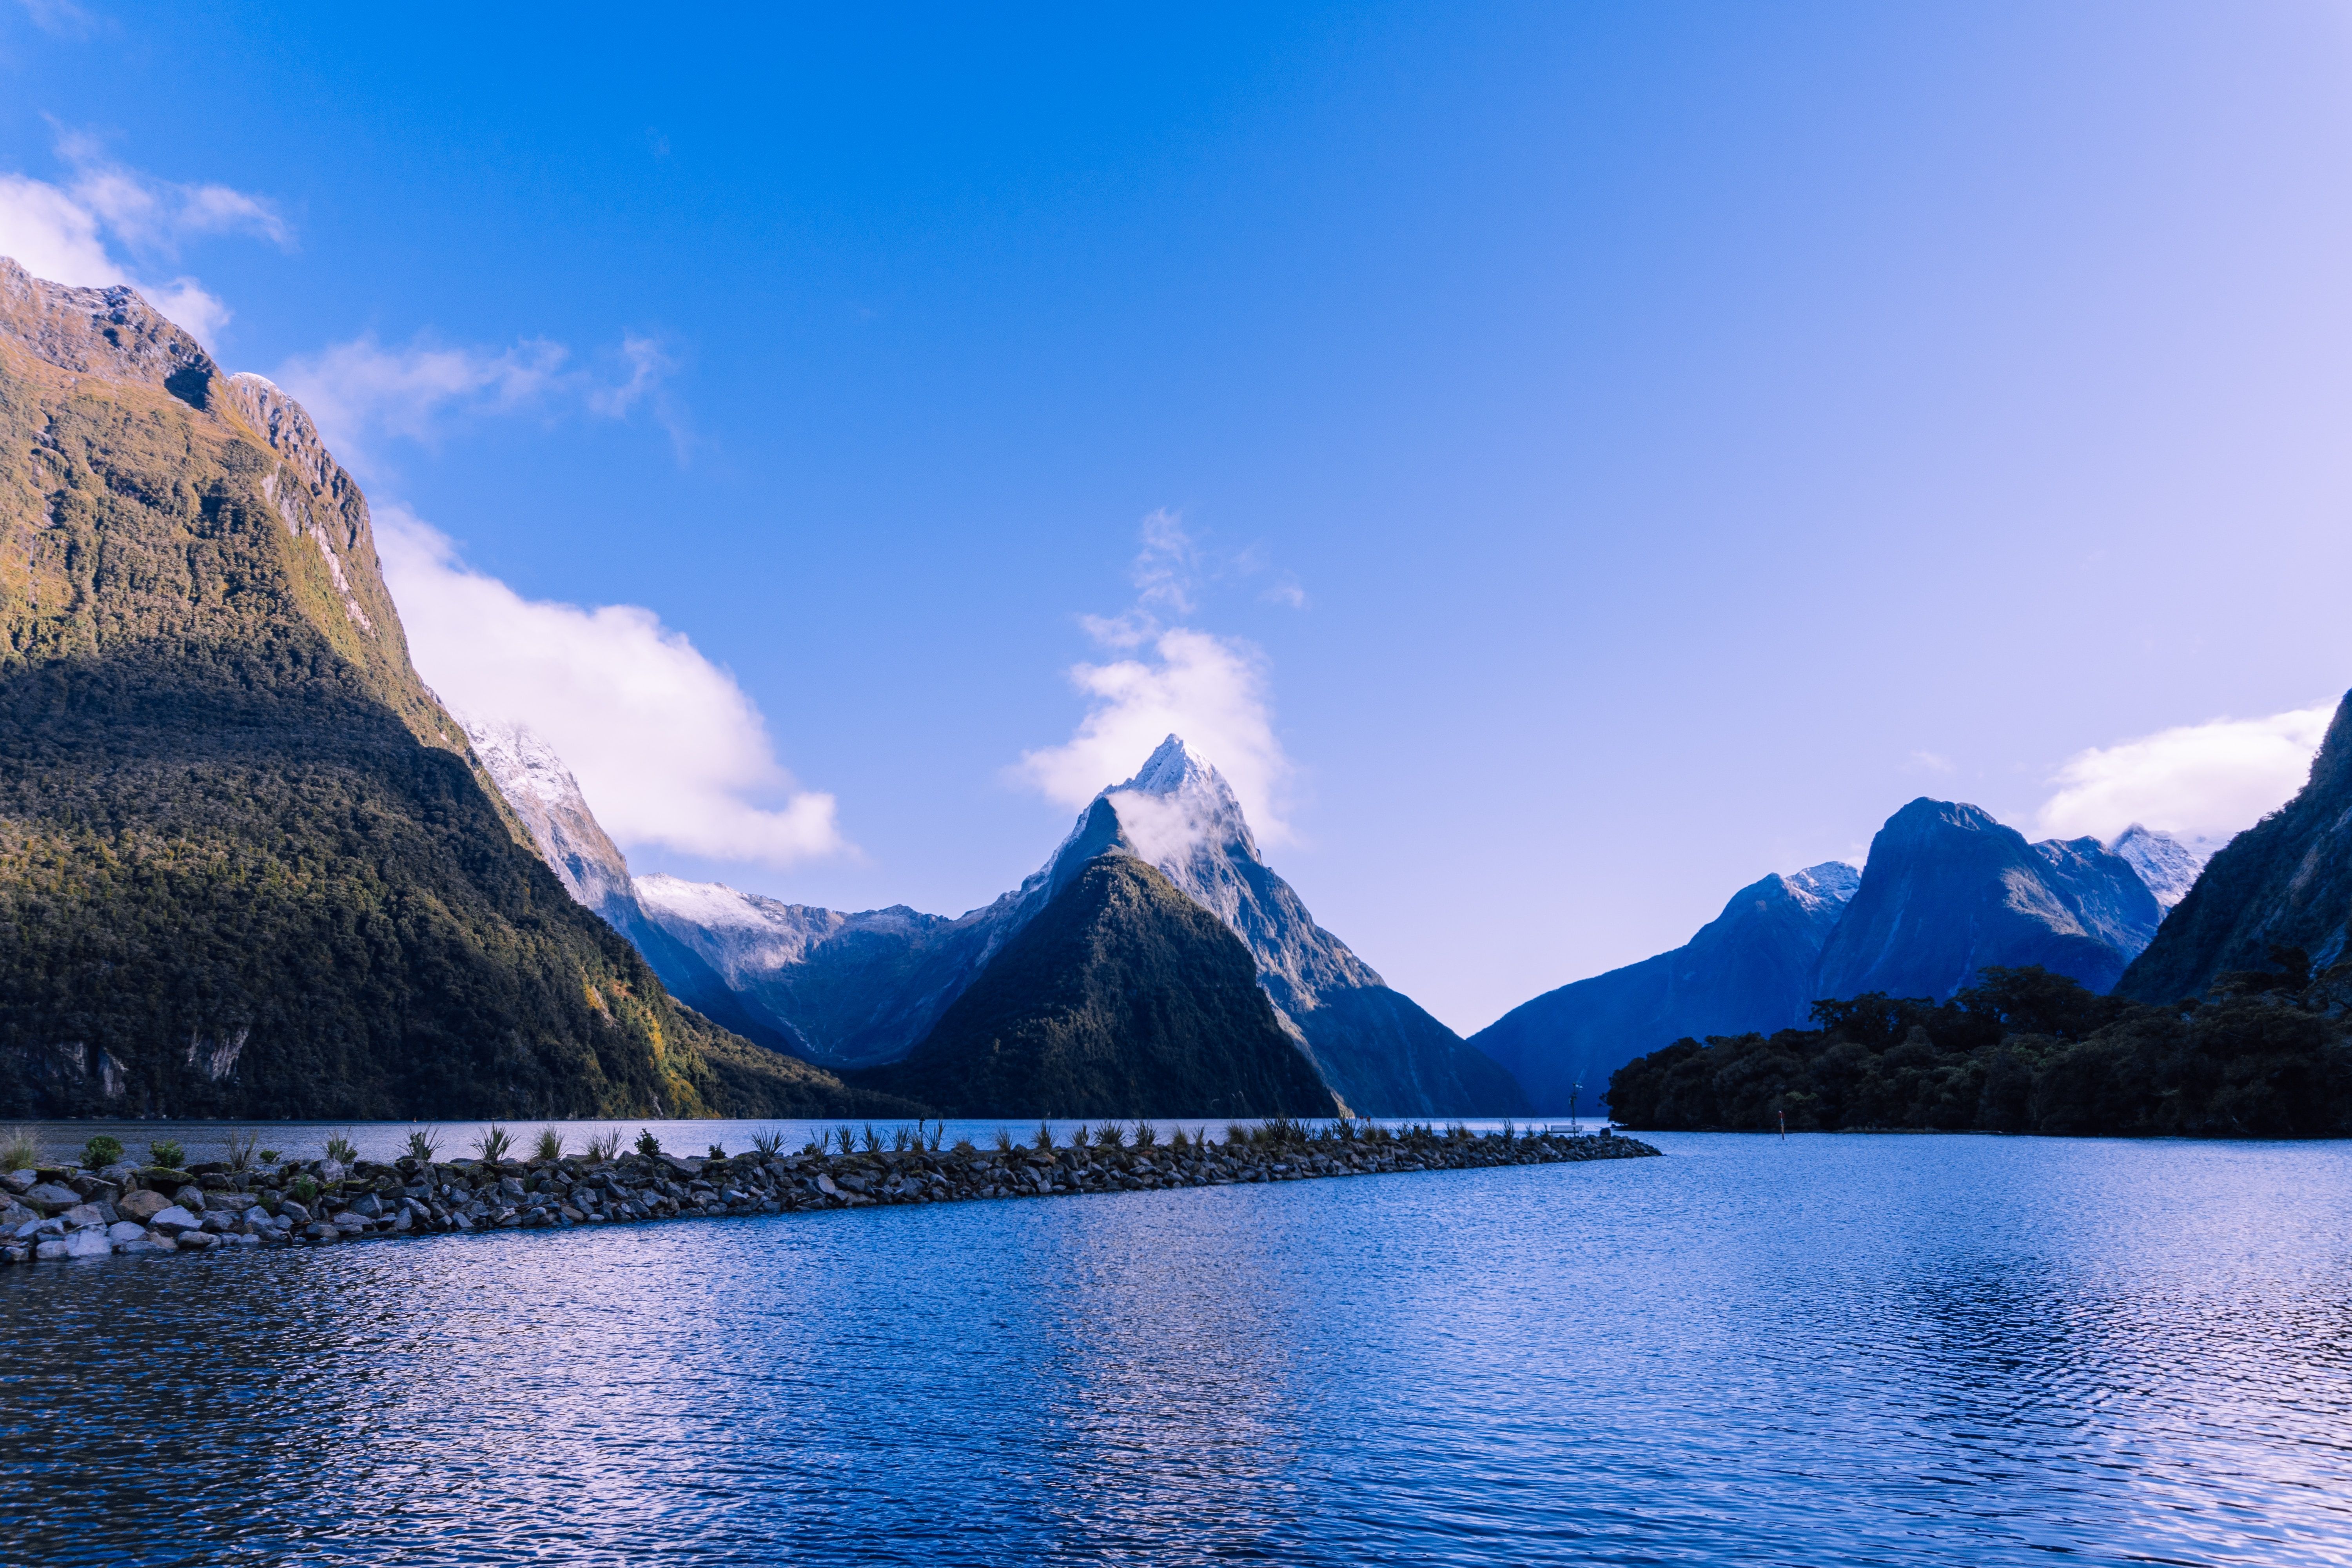 Milford Sound Fiordland National Park in New Zealand